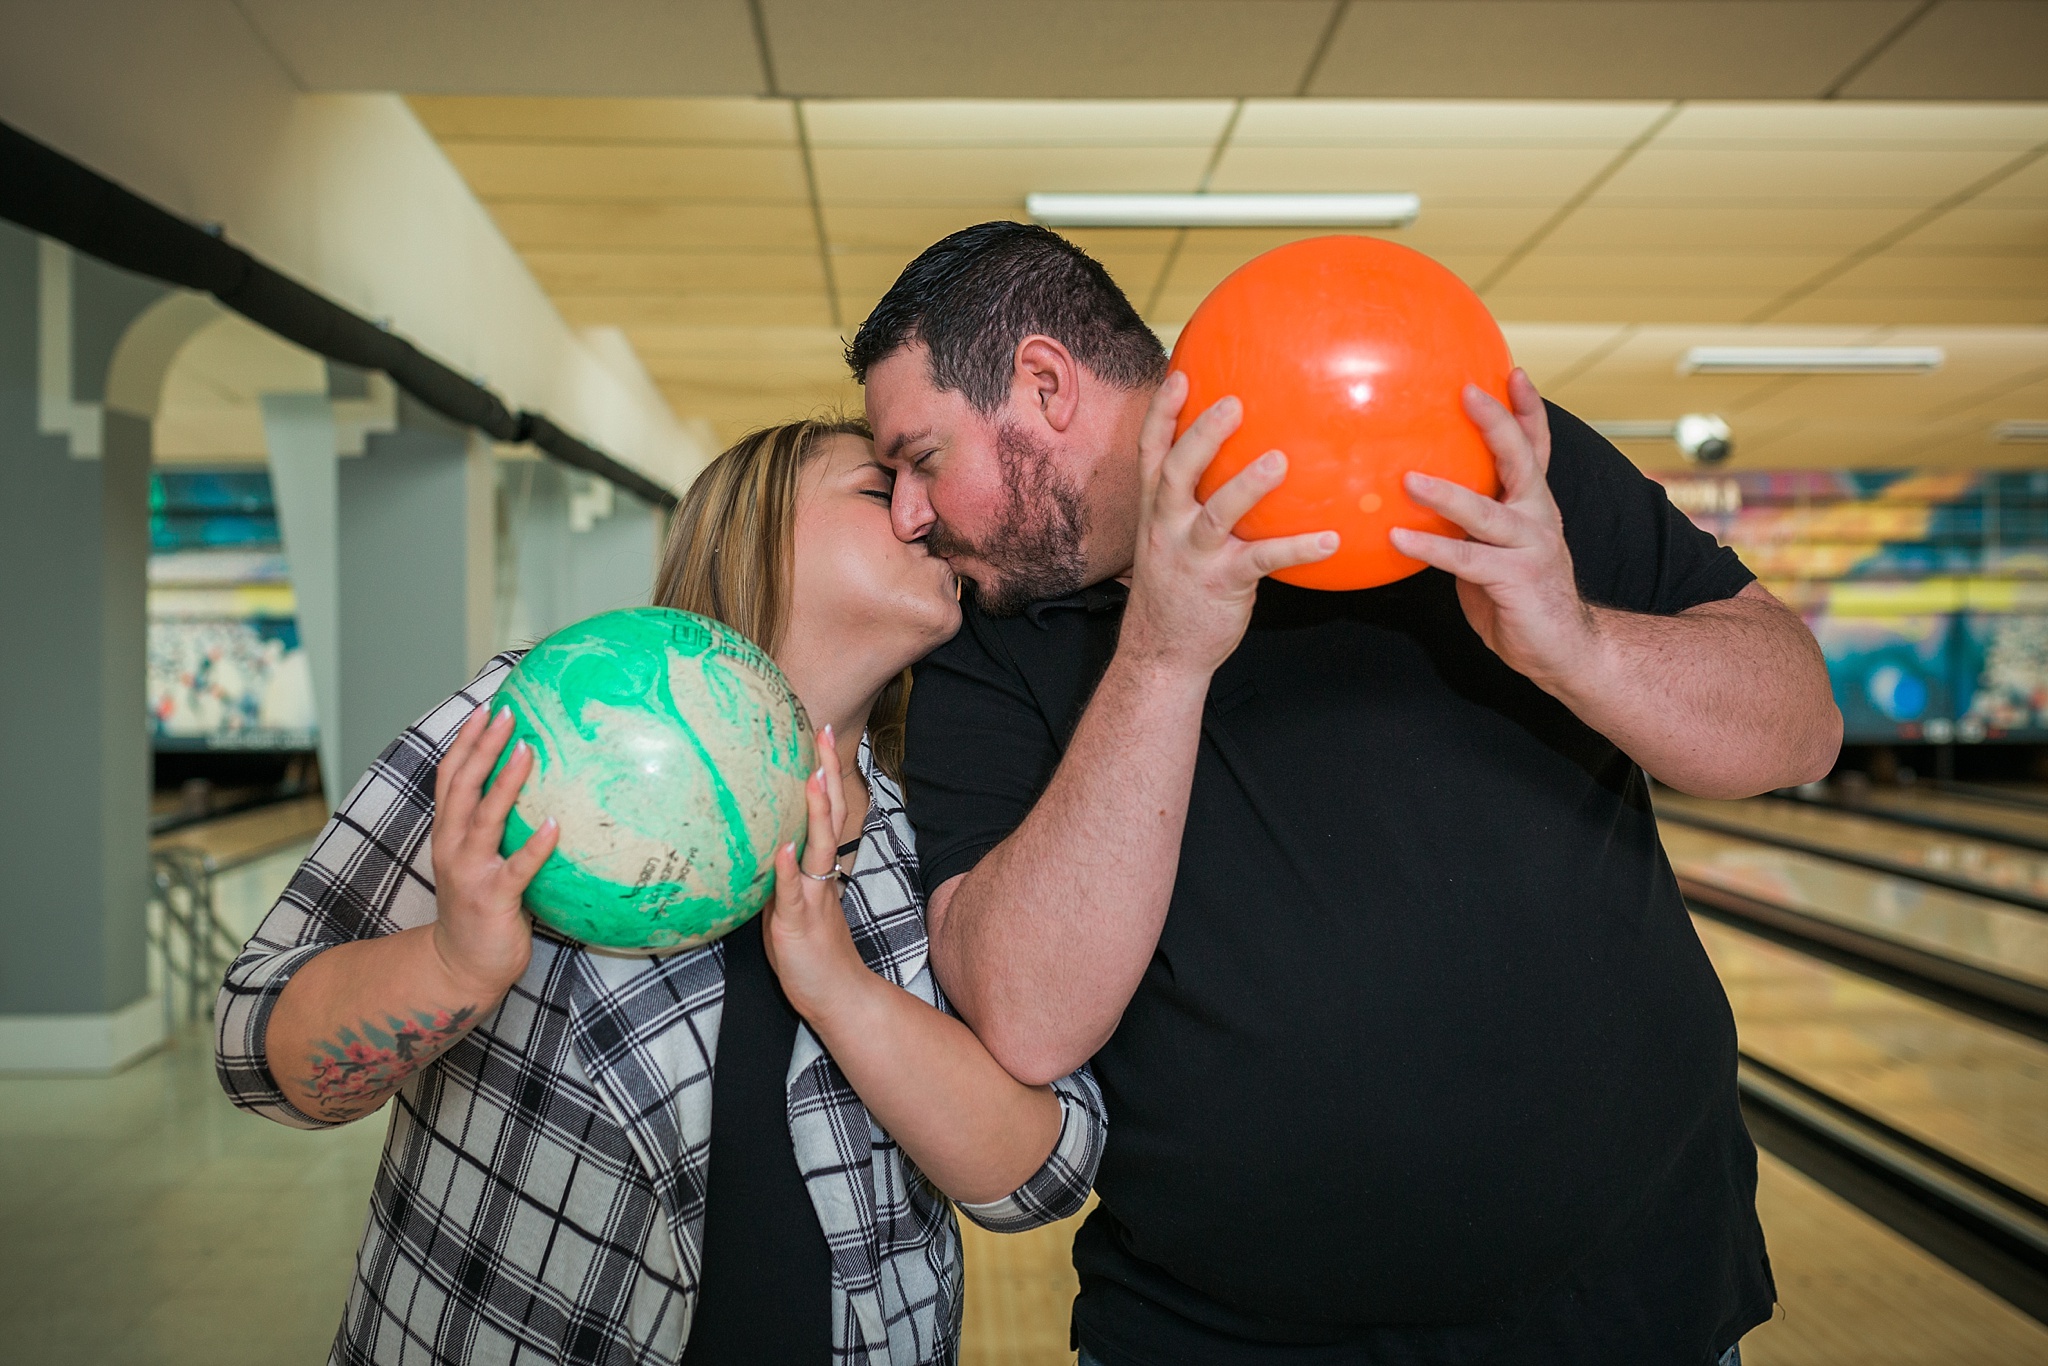 Couple holding bowling balls and kissing during their bowling alley engagement session. Briana & Kevin’s Devil’s Backbone and Sweetheart Lanes Engagement Session by Colorado Engagement Photographer, Jennifer Garza. Devil's Backbone Engagement, Devil's Backbone Engagement Session, Loveland Engagement Session, Colorado Engagement Photography, Colorado Engagement Photos, Sweetheart Lanes Bowling Alley, Bowling Alley Engagement, Bowling Engagement Session, Bowling Engagement Photography, Wedding Inspo, Colorado Wedding, Colorado Bride, Brides of Colorado, Bride to Be, Couples Goals